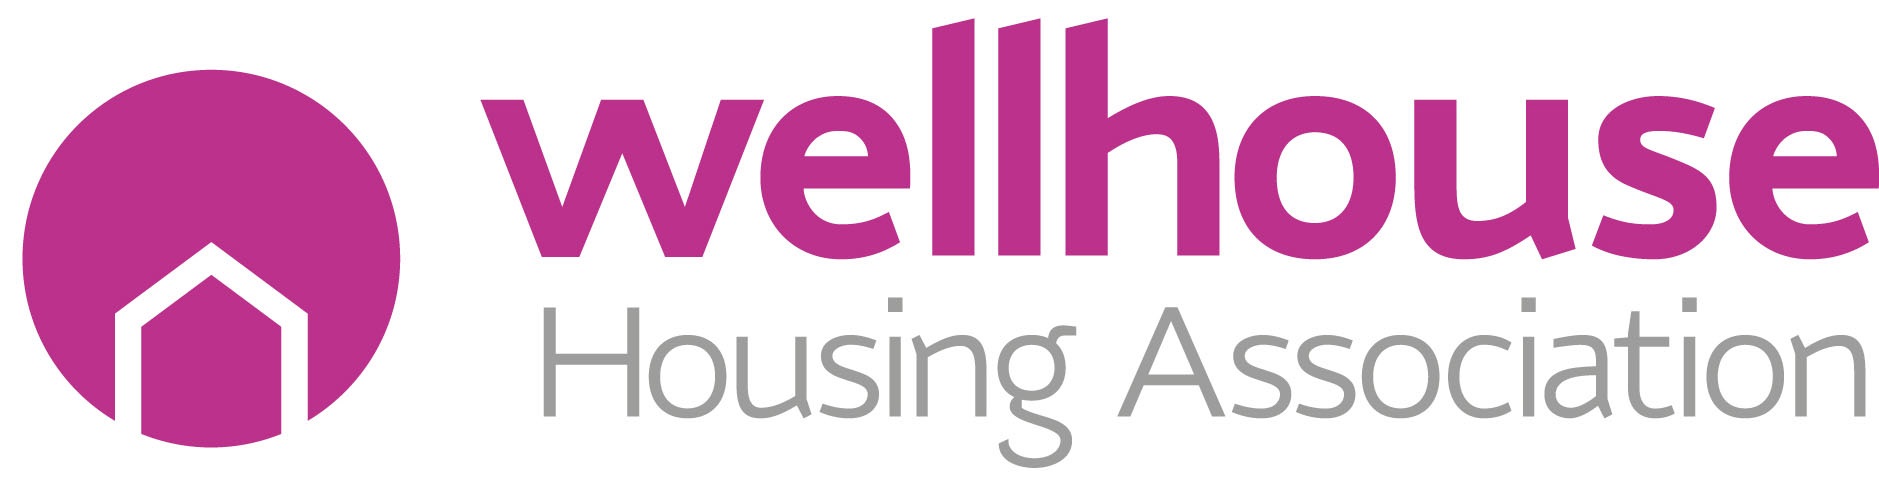 Wellhouse calls for voluntary committee members to improve lives of ...